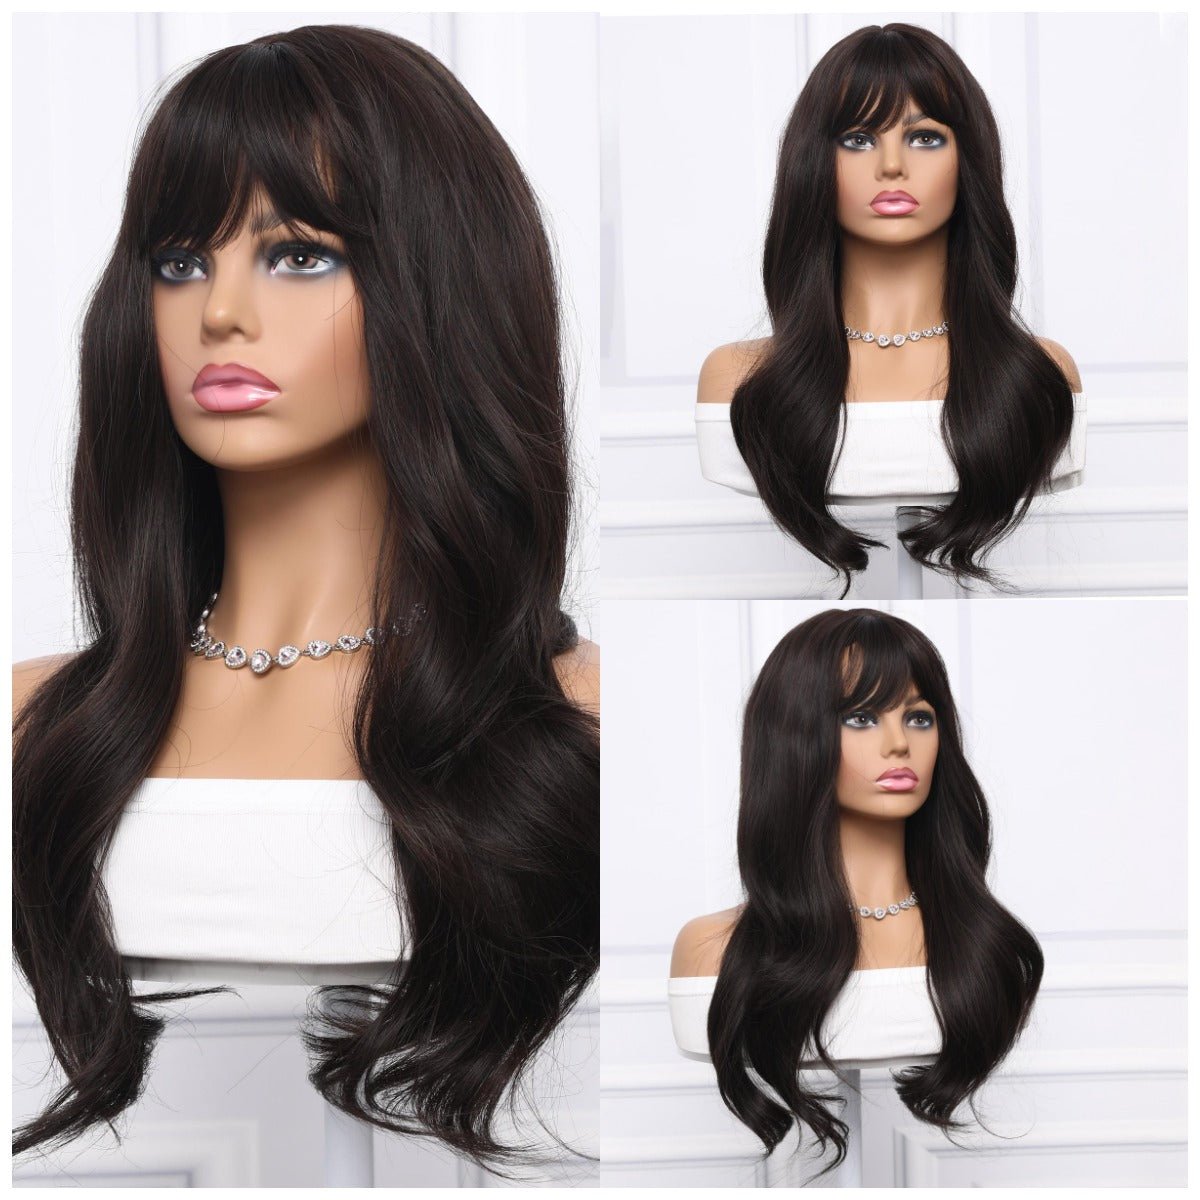 24-inch | Black Loose Wave with Hair Bangs | SM226-2 - TapLike